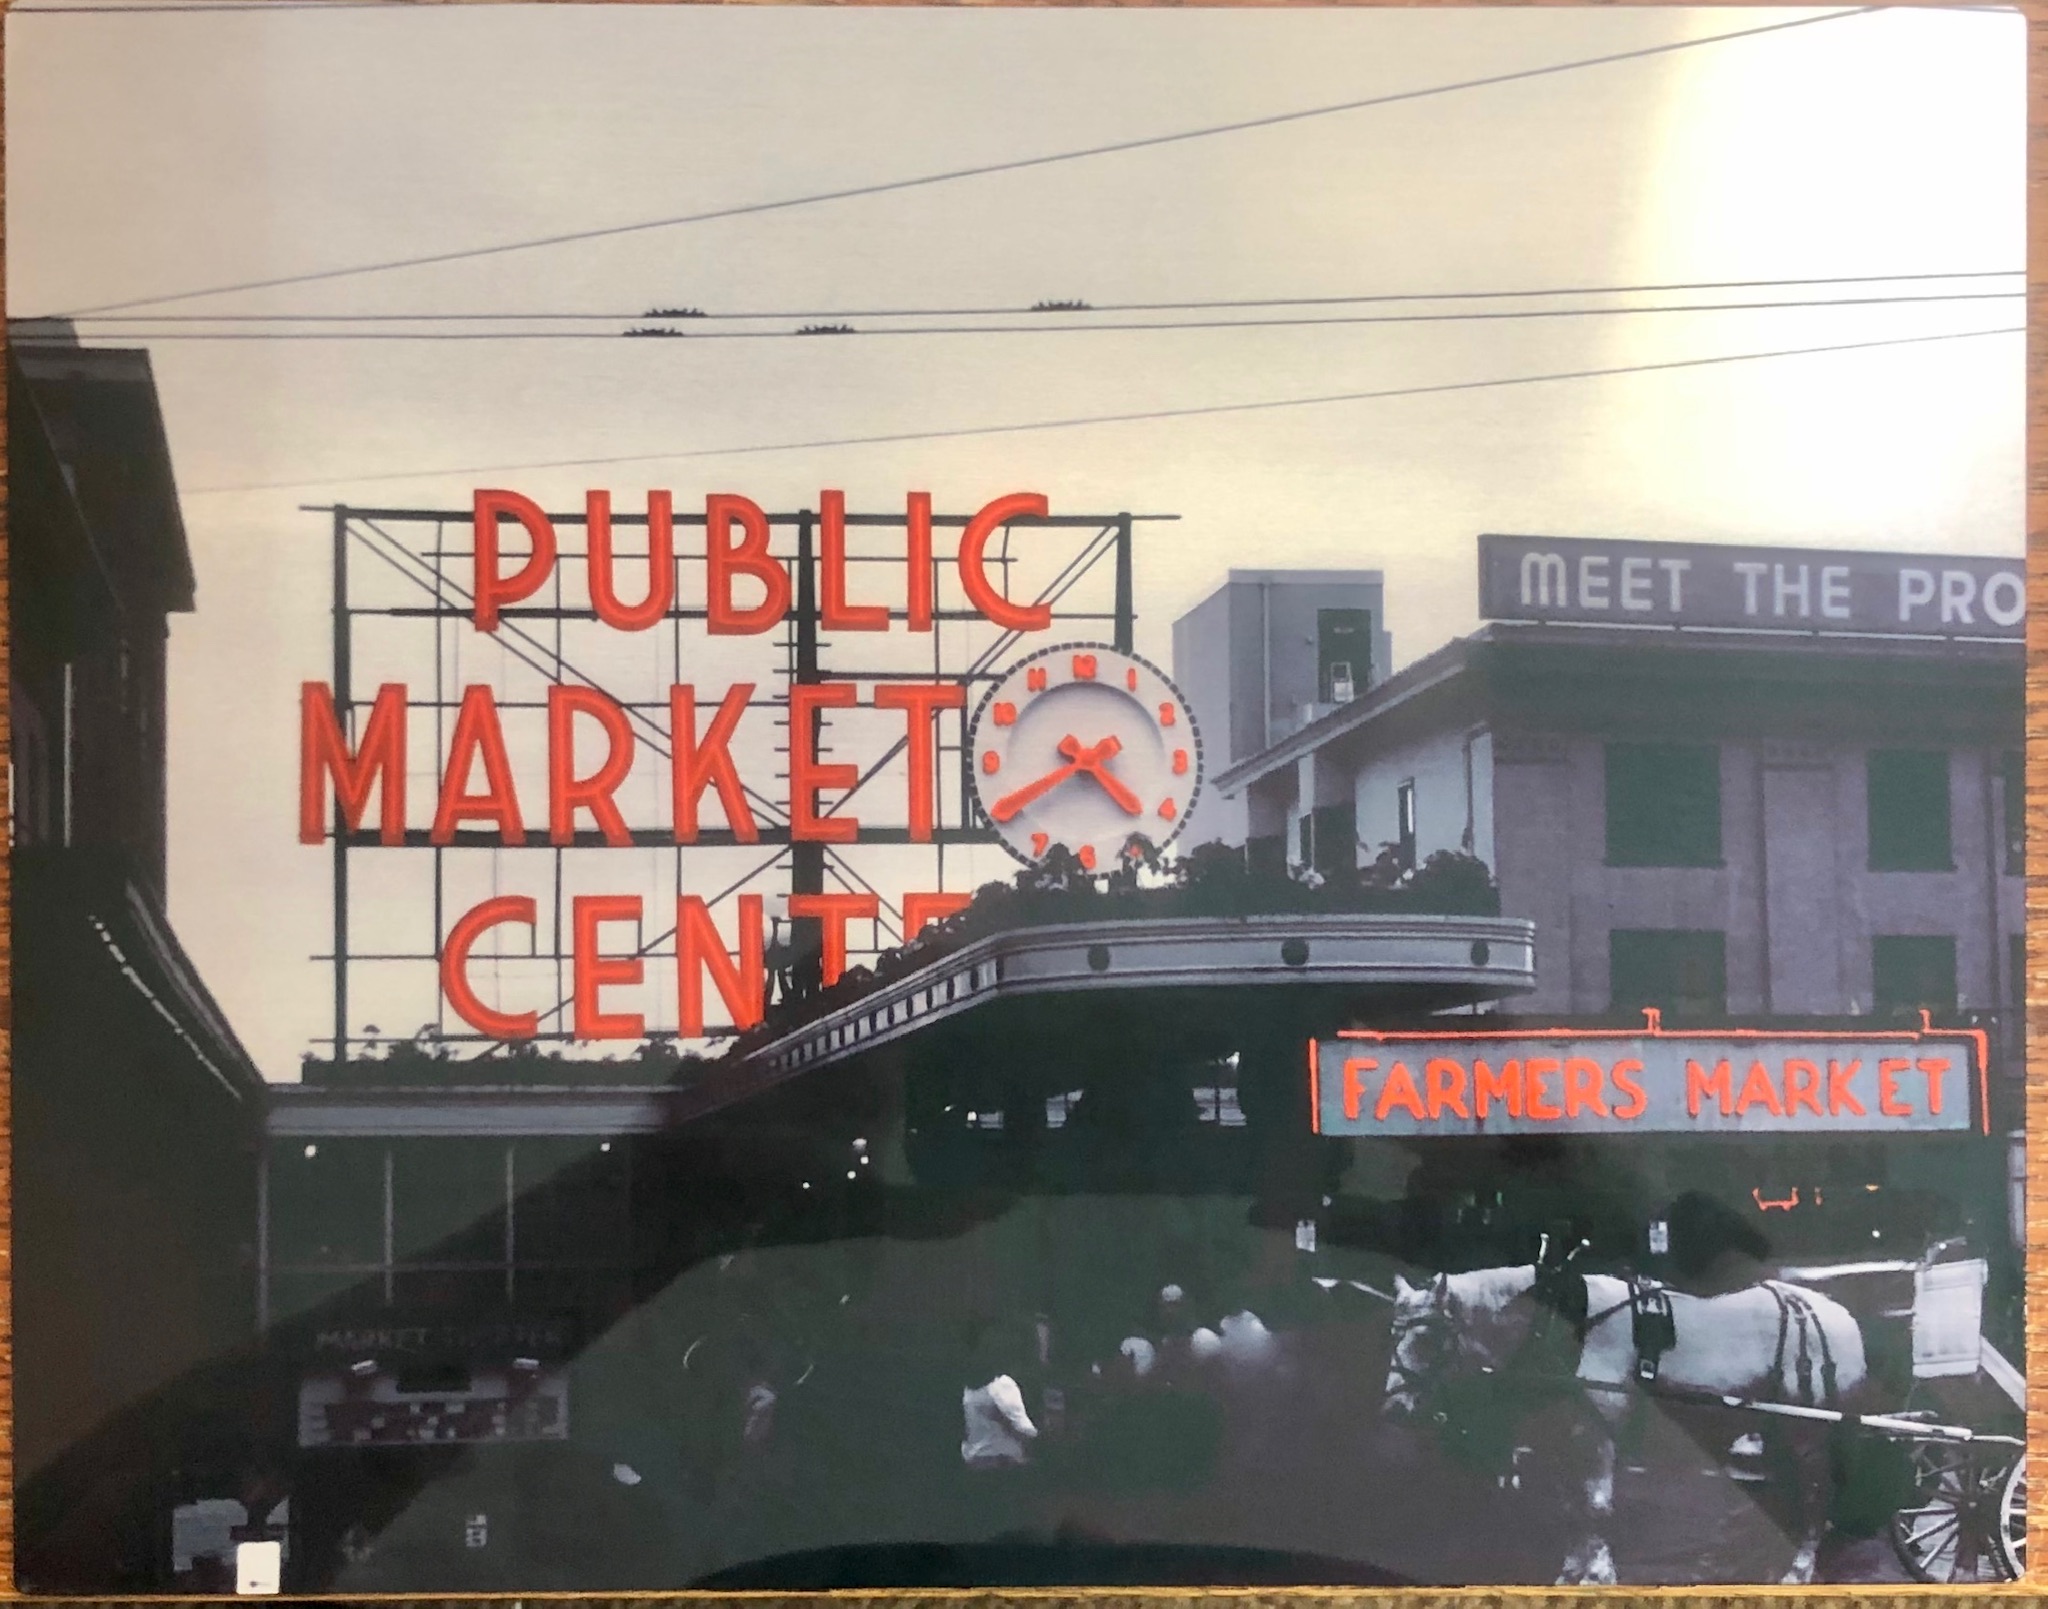 Pike Place Market, Seattle, WA June 2012 - series of photos edited together to remove motor veh